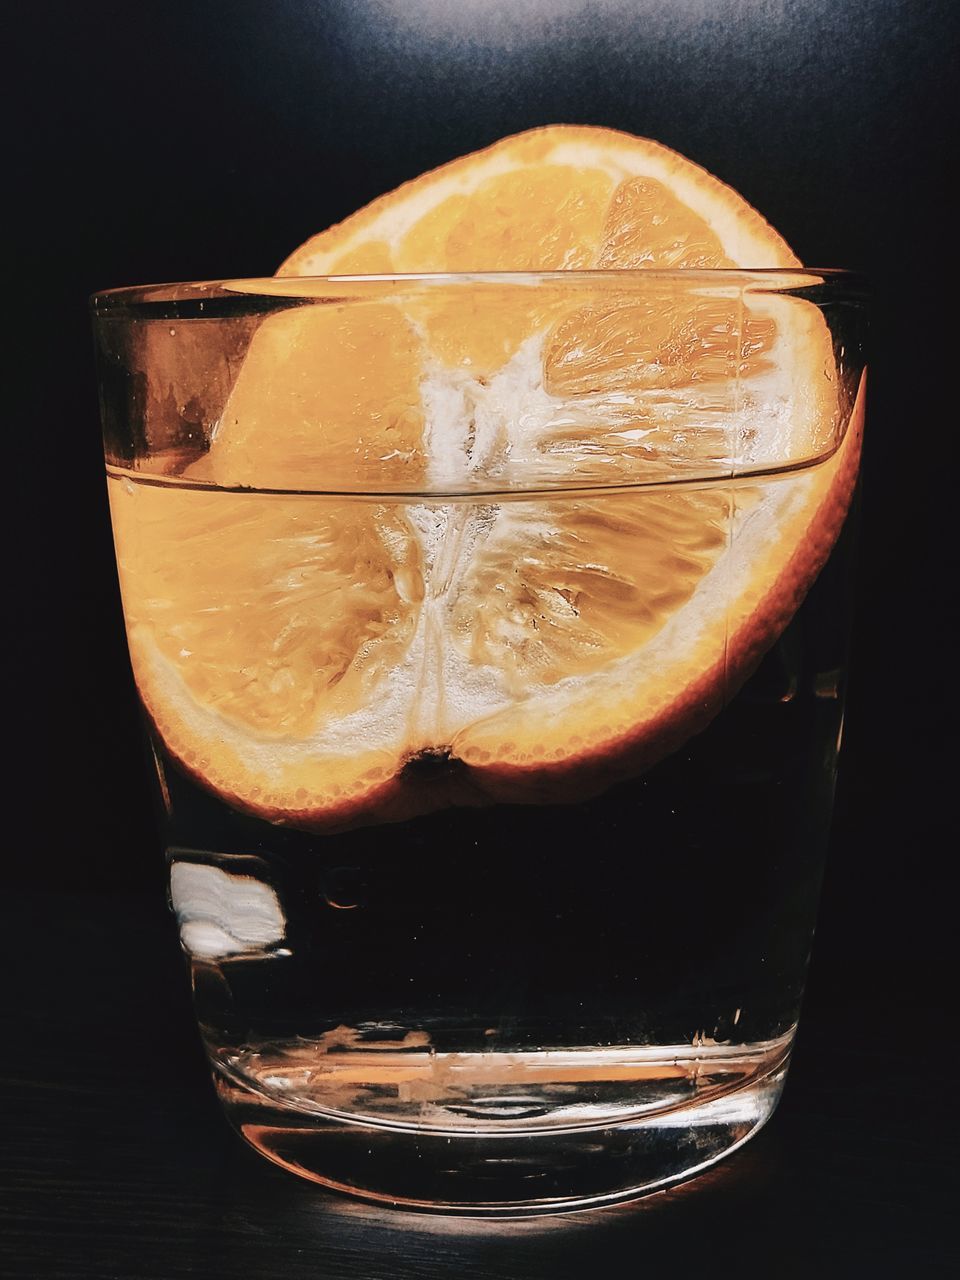 swimming Orange - Fruit Glass Glassofwater Fruit Photography Black Background Drink Drinking Glass Studio Shot Ice Cube Cold Temperature Close-up Food And Drink